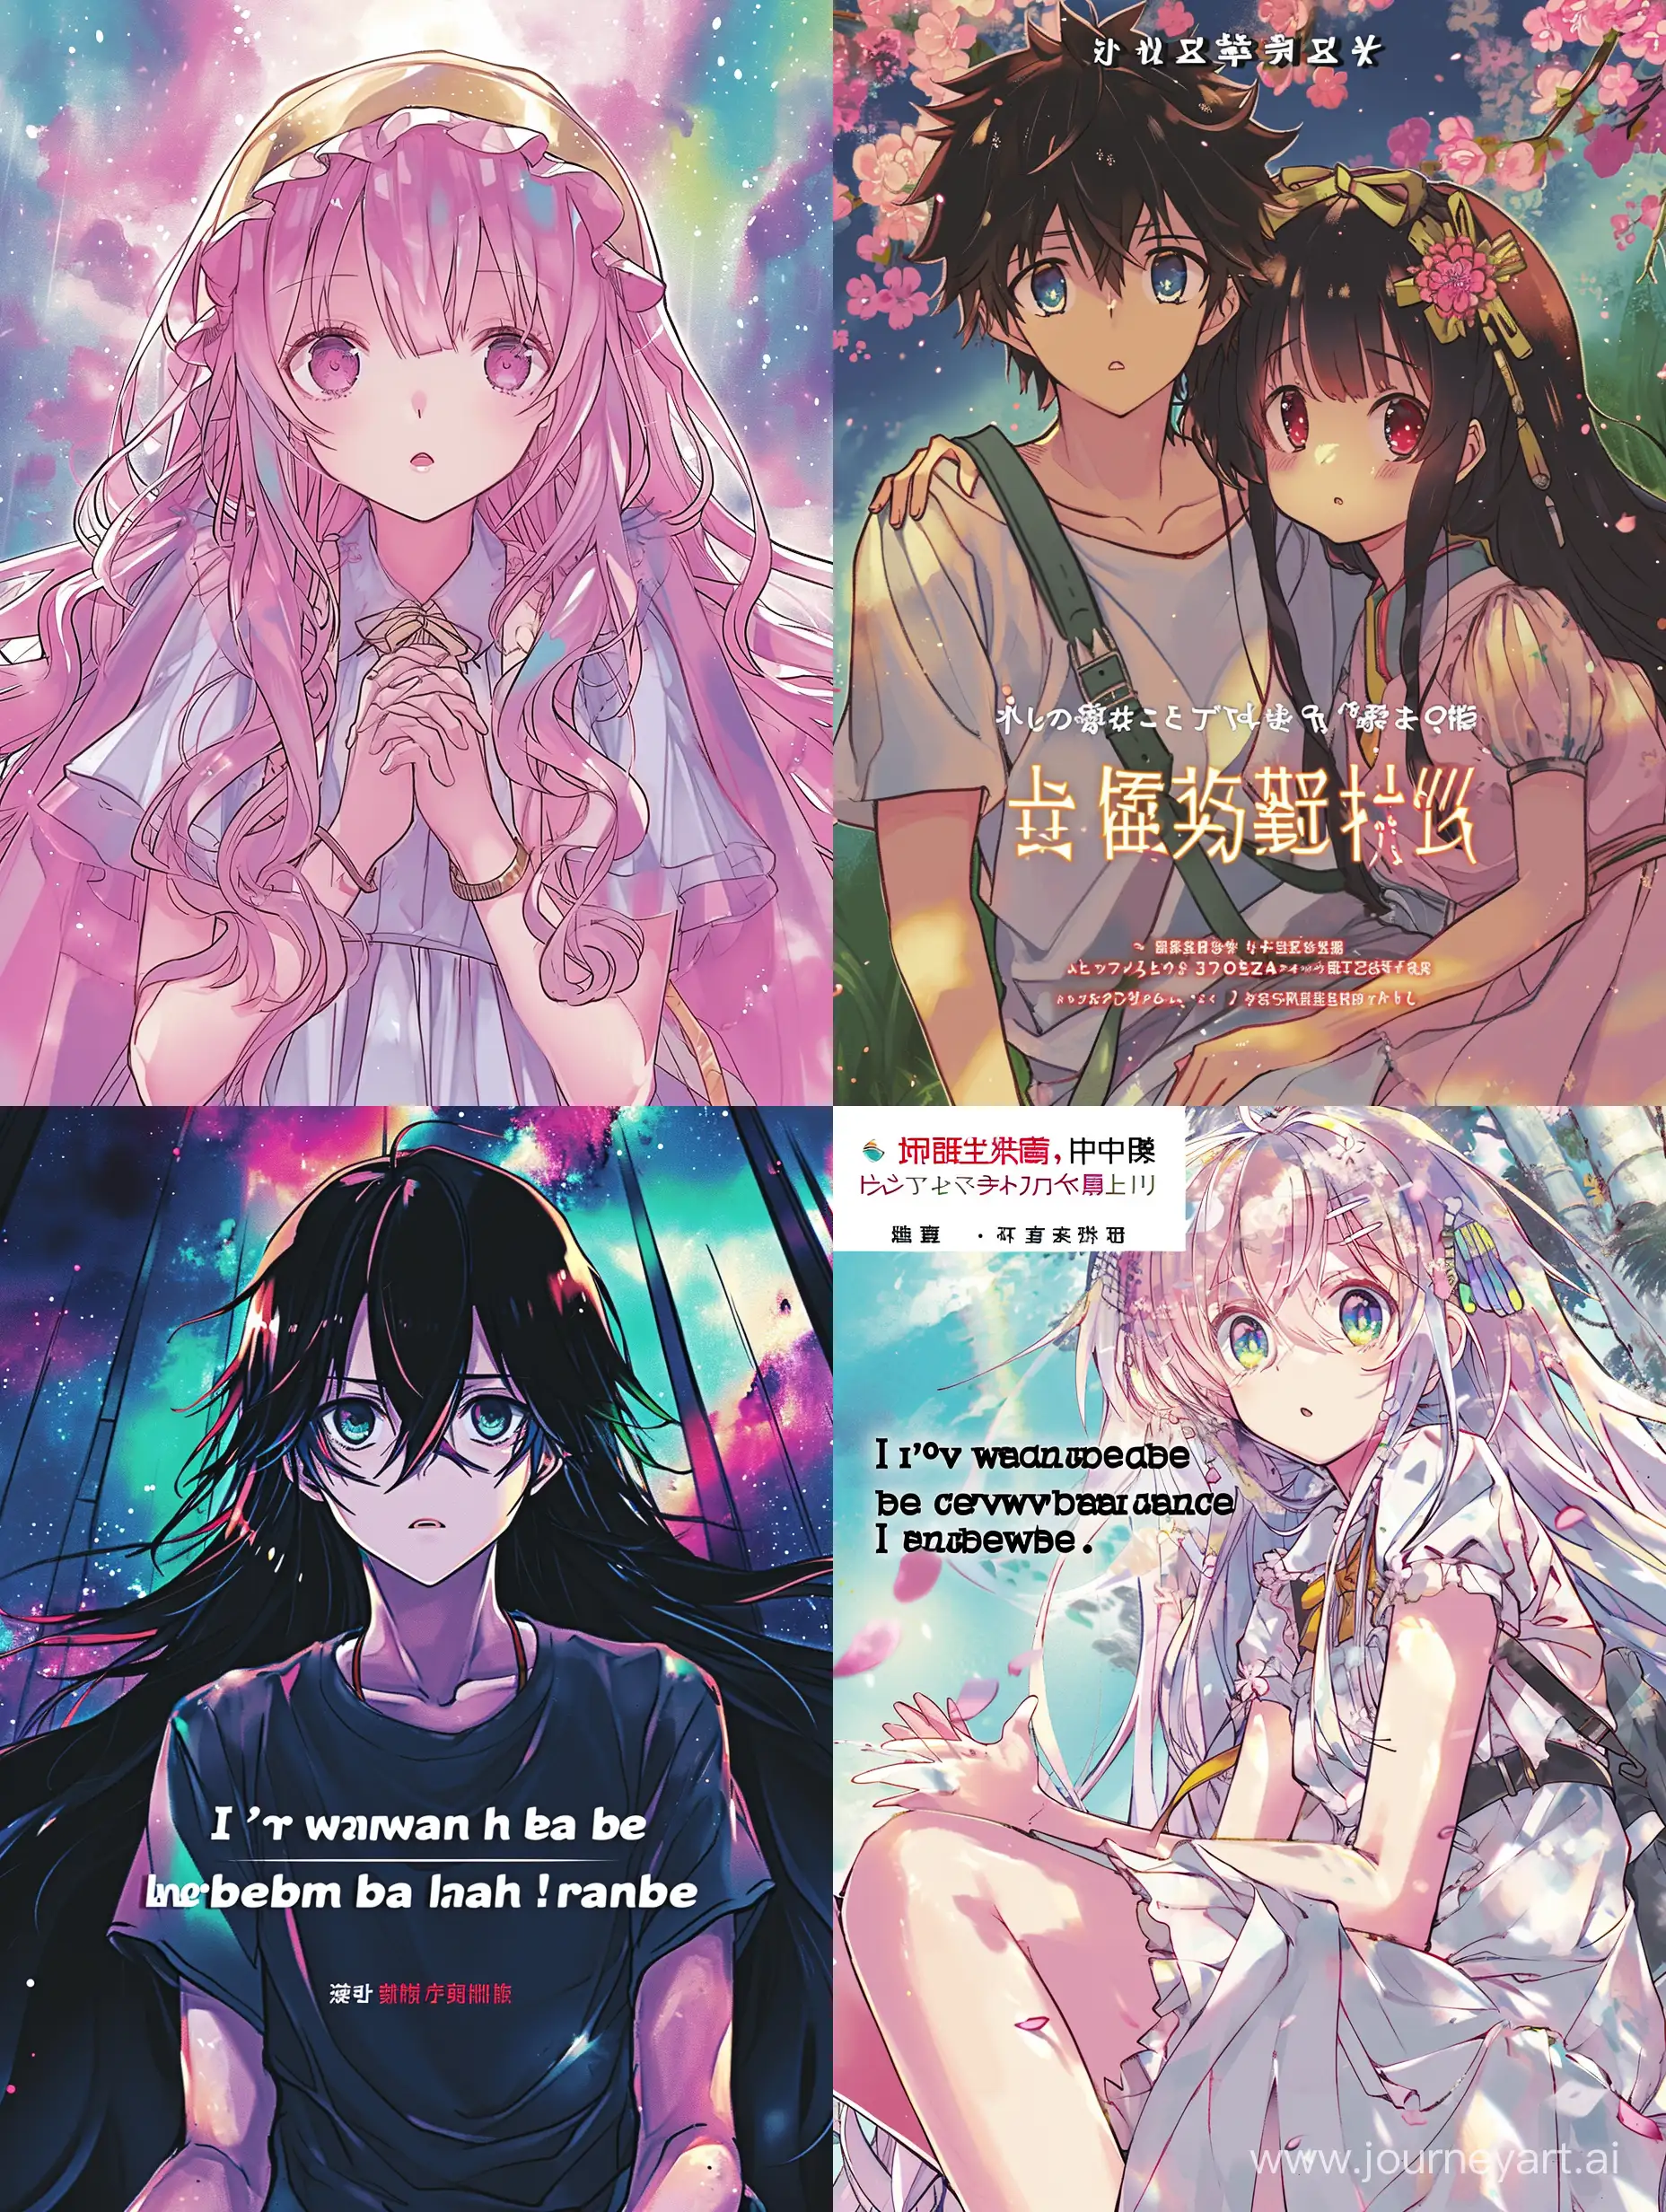 Heartwarming-Light-Novel-Cover-I-Dont-Want-to-Be-Reborn-Alone